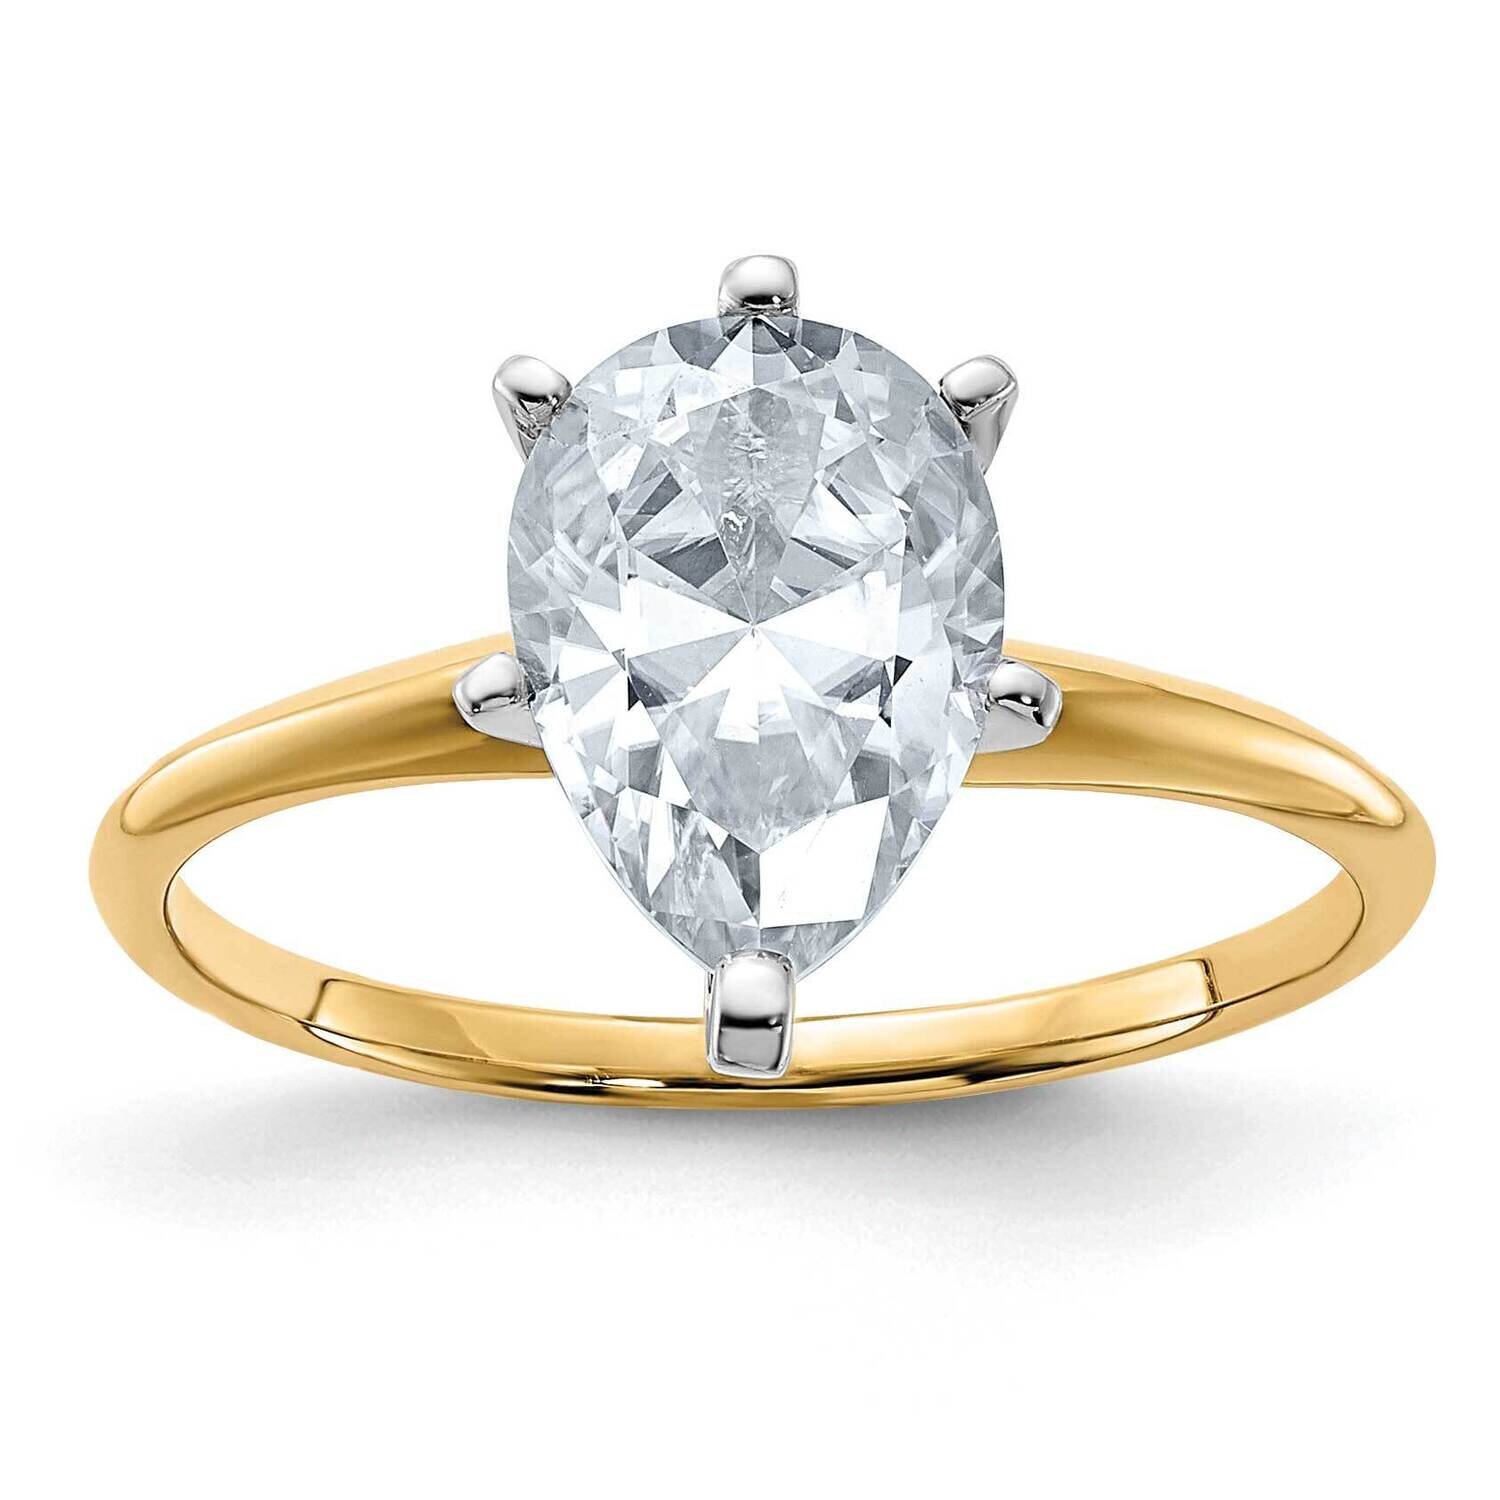 2ct. D E F Pure Light Pear Moissanite Solitaire Ring 14k Gold YGSH15A-15MP-9